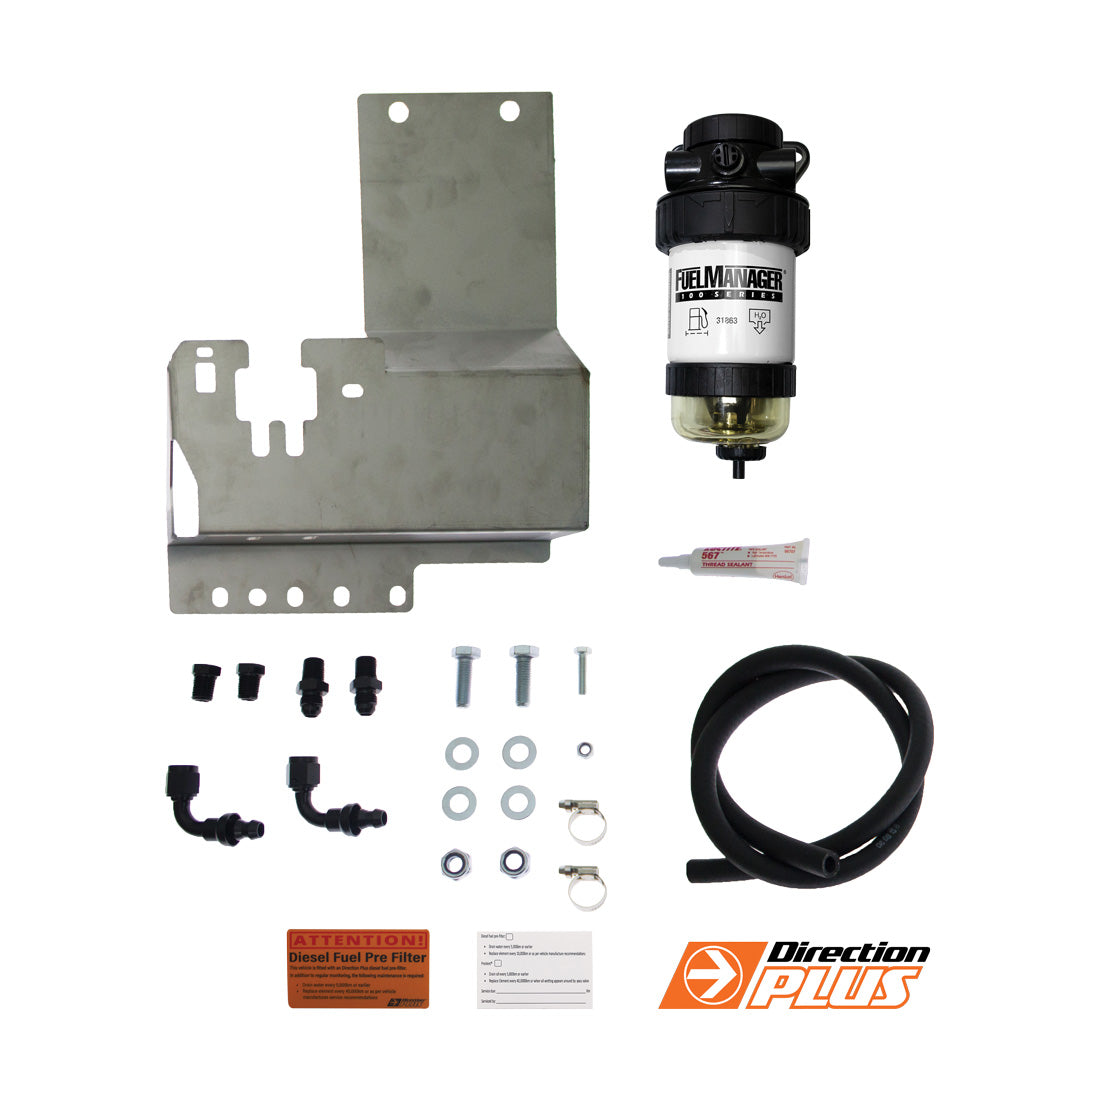 N80 Hilux / 1GD Fortuner Pre Filter and Catch Can Combo -  (FMPV628DPC) - Common Rail Cowboys